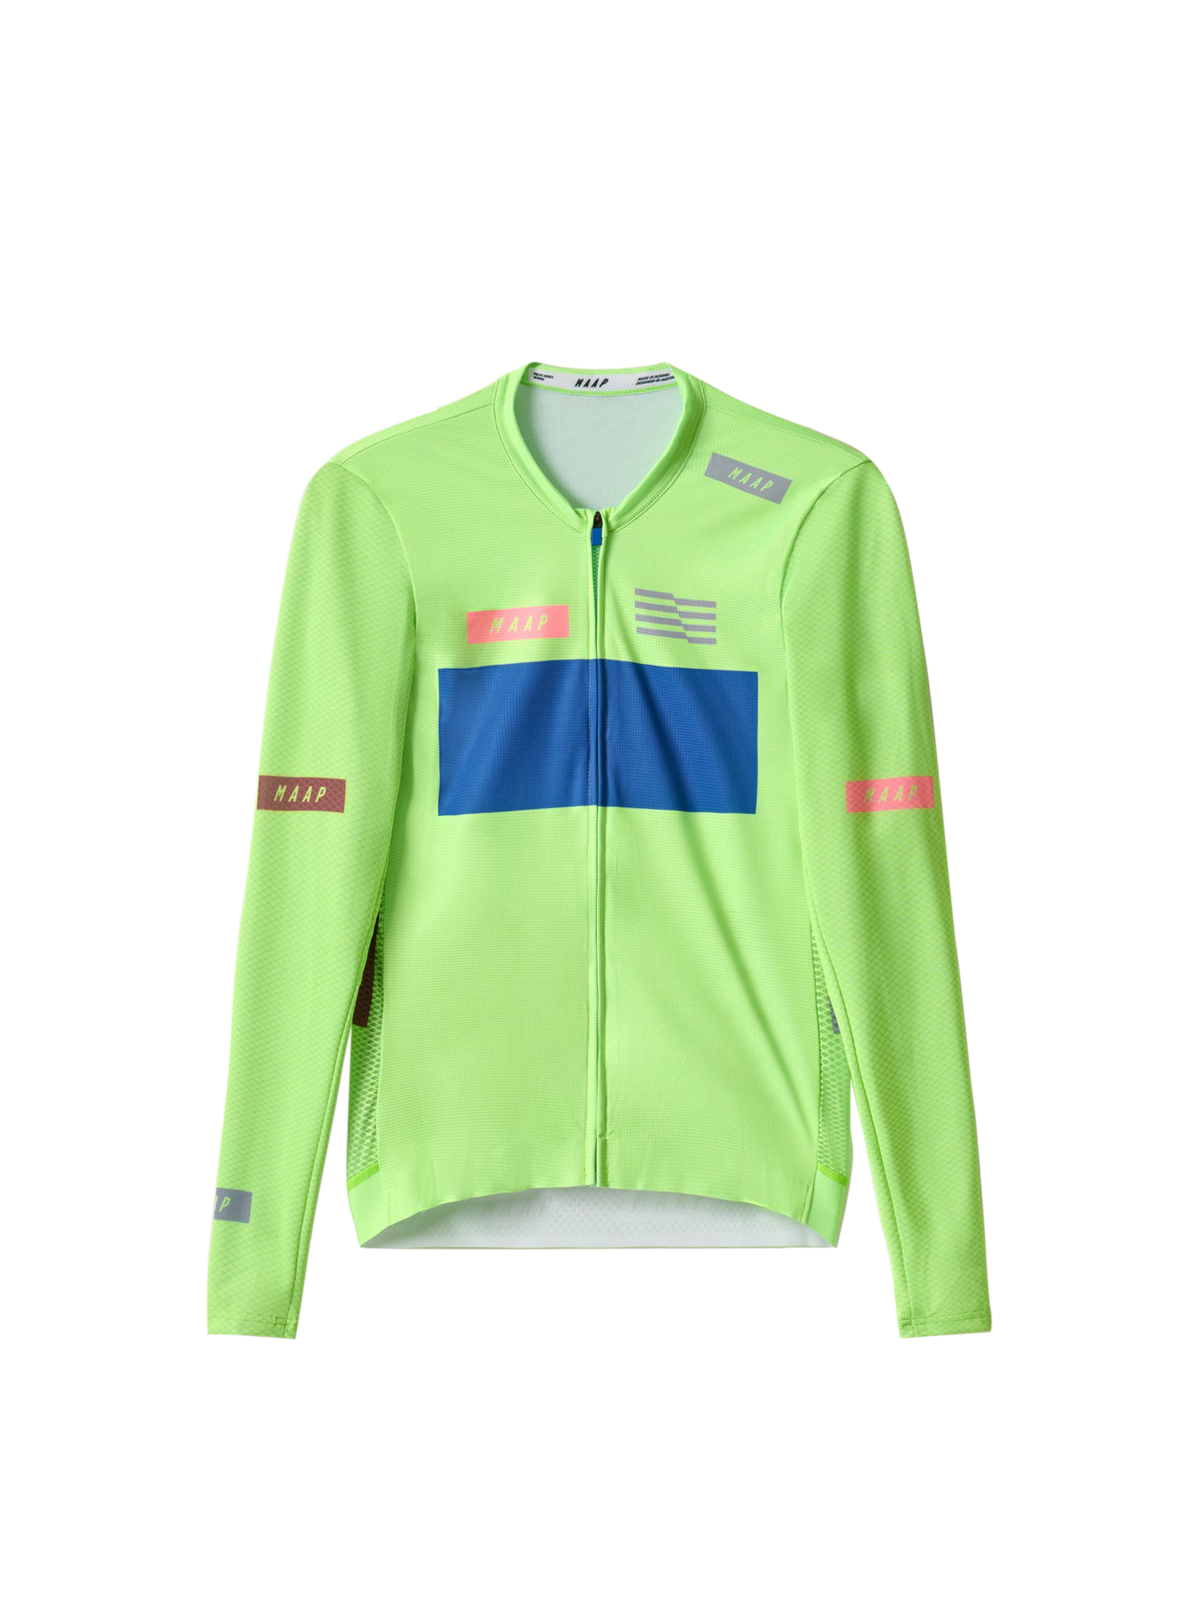 System Pro Air LS Jersey